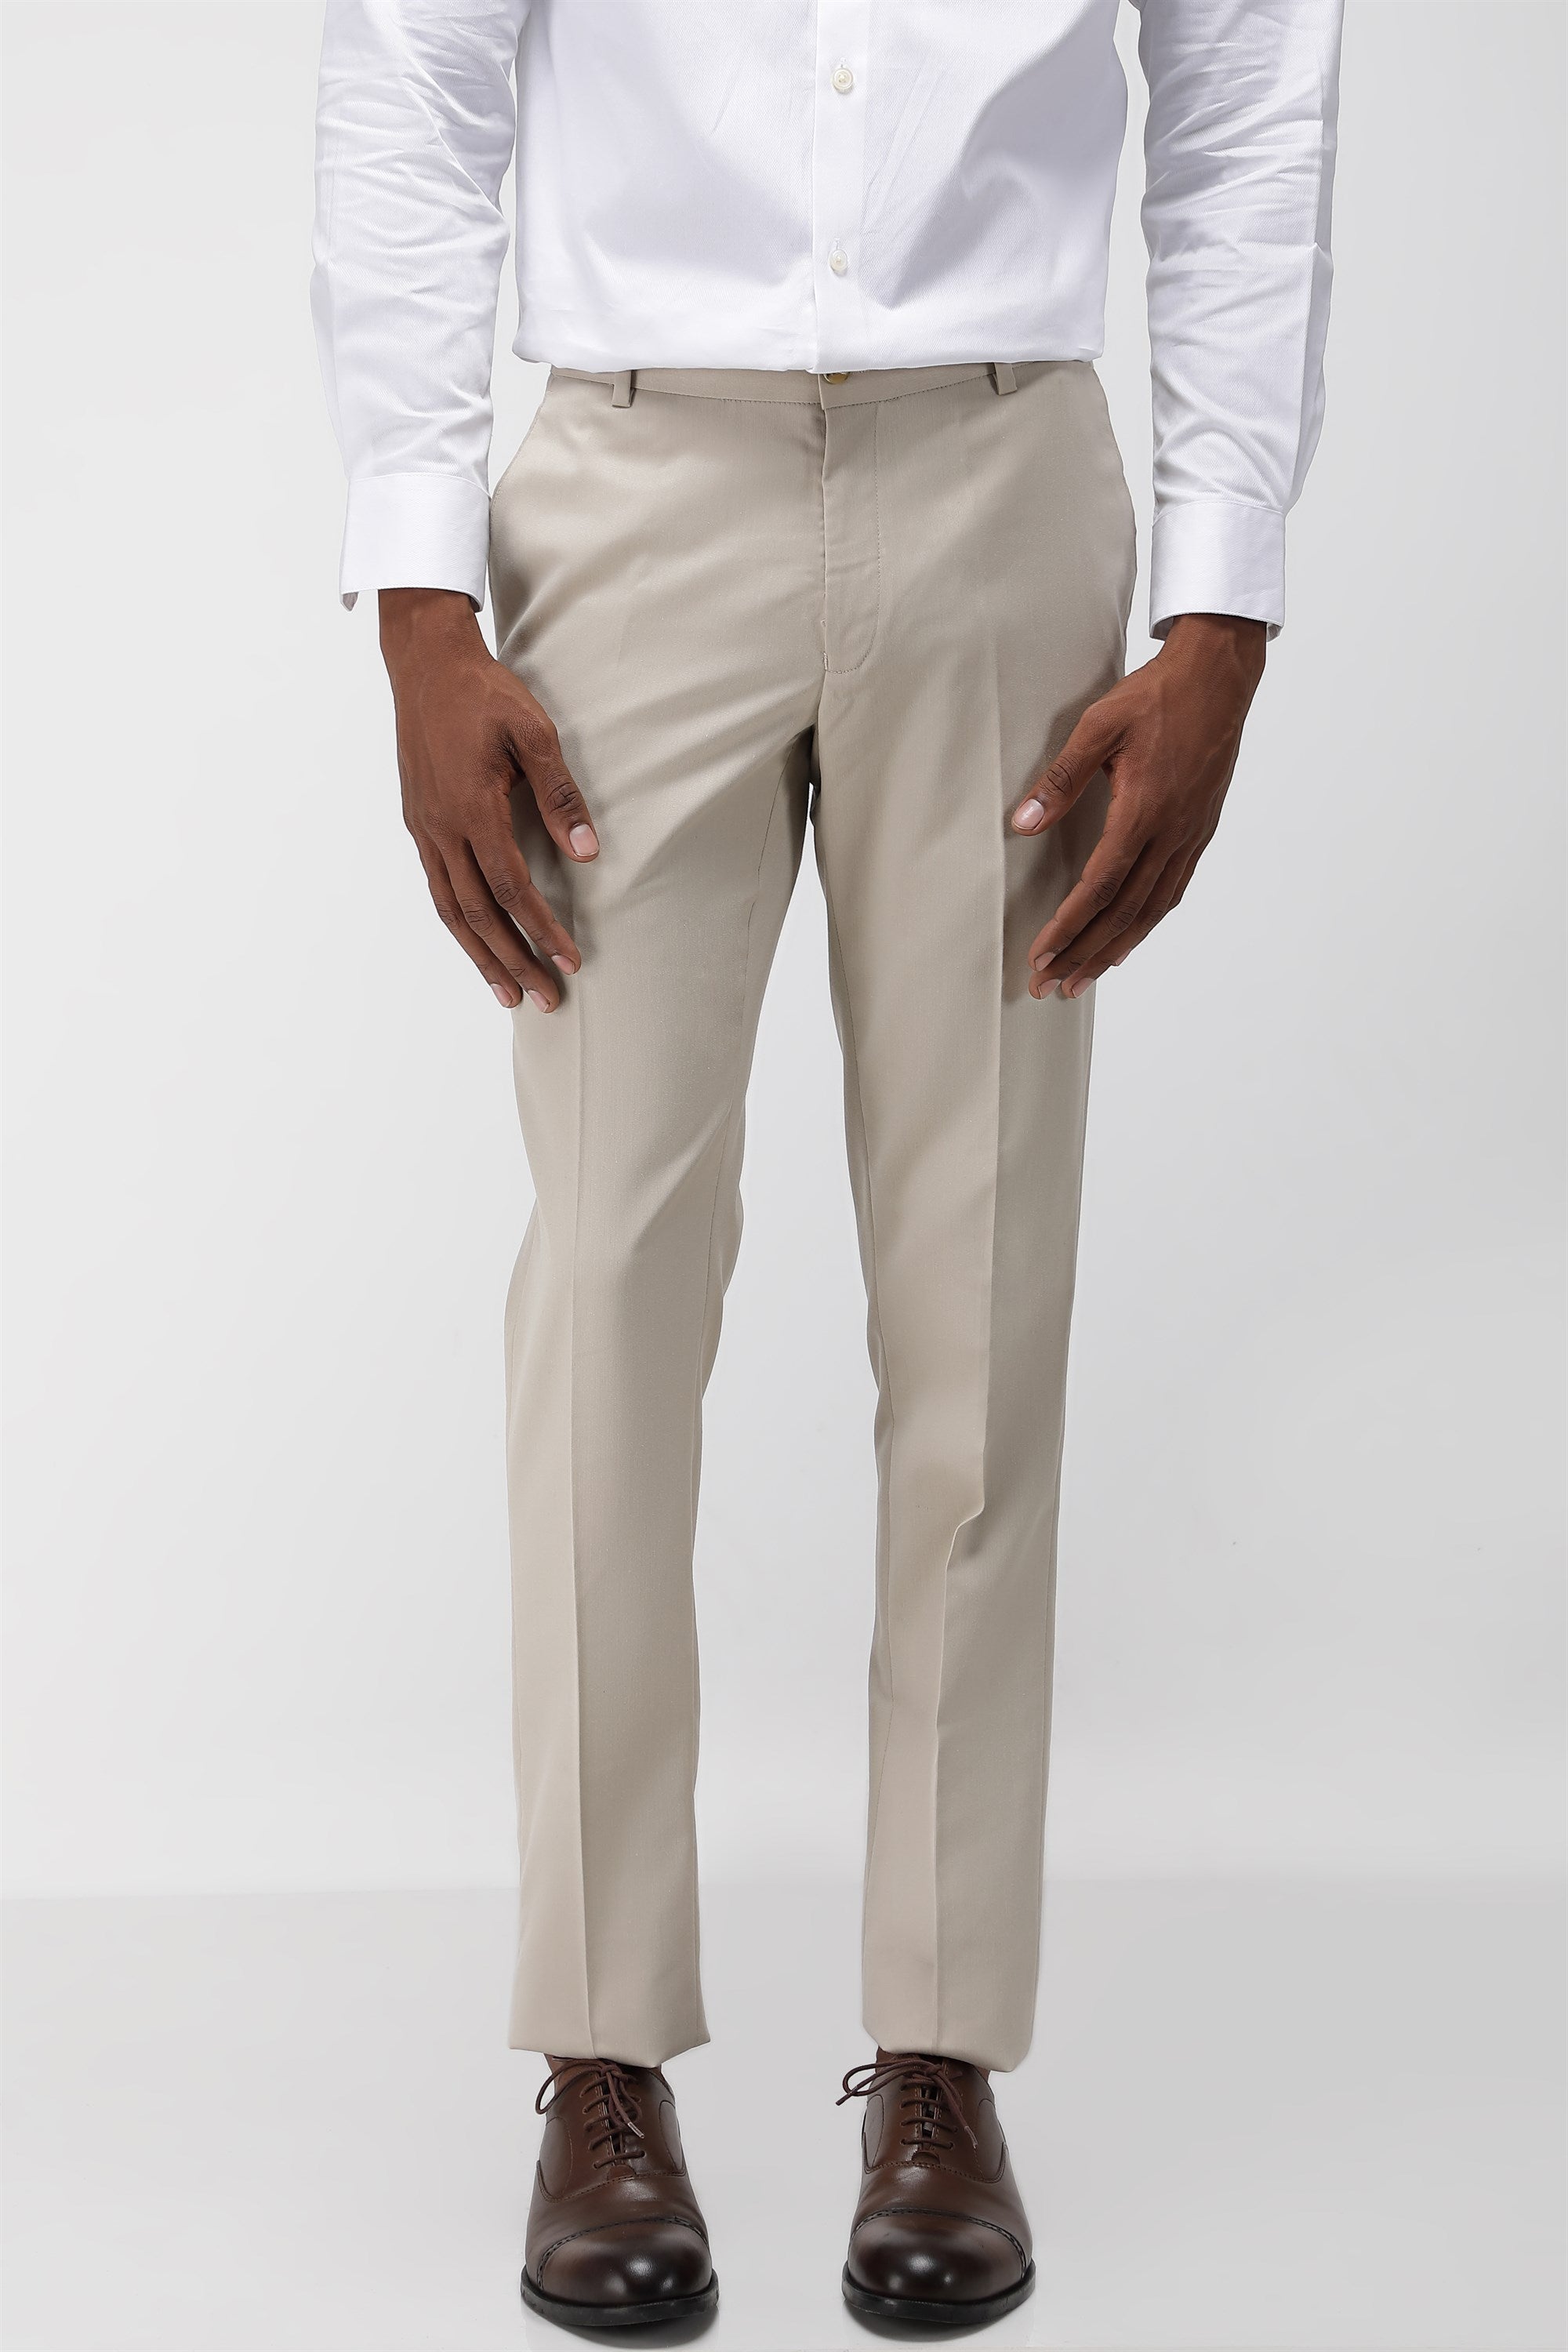 Buy Louis Philippe Navy Trousers Online - 803896 | Louis Philippe